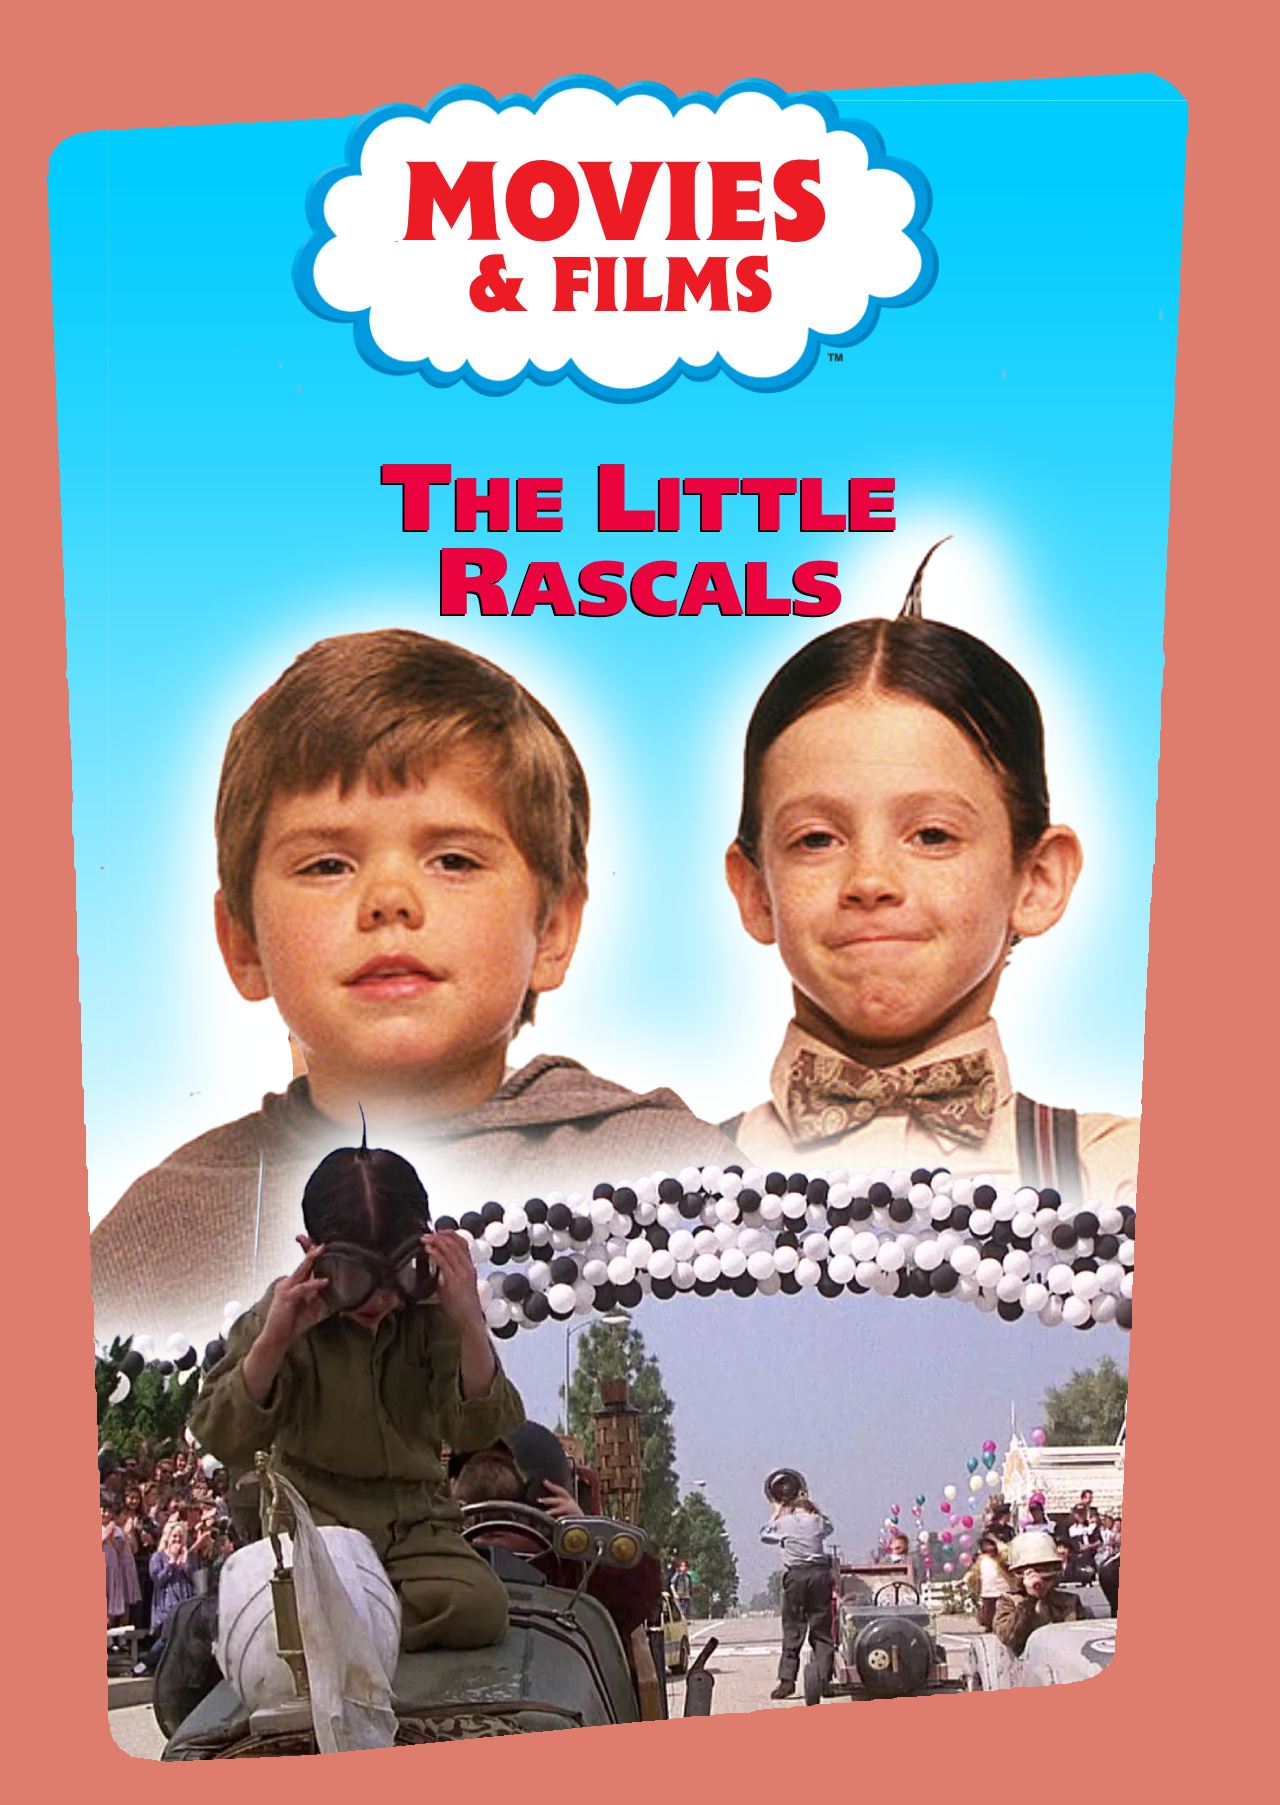 The Little Rascals Photopea Dvd By Nickthedragon2002 On Deviantart